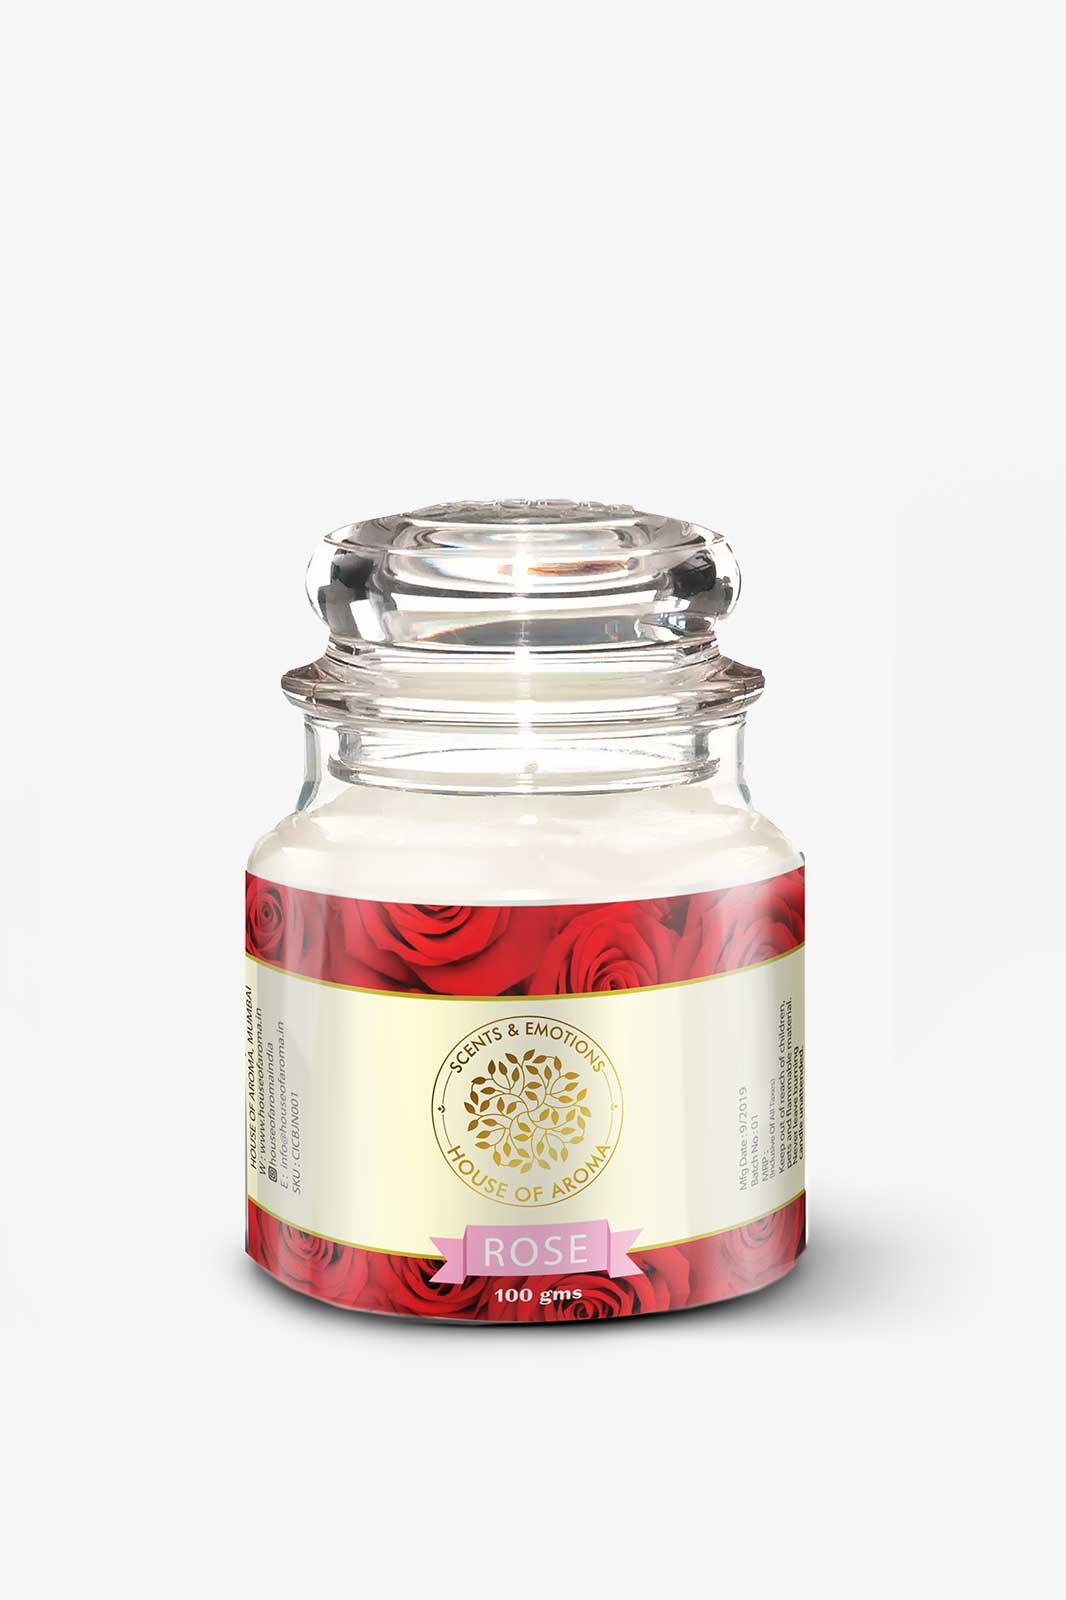 rose wax candle, rose candle, rose bell jar candle, roses candle 600g, rose wax candles, rose votive candles, rose vetiver candle, rose vanilla candle, rose soy wax candle, rose scented wax candle, rose luxury candle, rose lavender candle, House of Aroma, scented candles online, home decor scented candles, organic scented candles, online scented candles, home decor candle, buy scented candles online, room decor candles, best scented candles online, organic candles India, aroma candles online India, organic scents for candles, organic soy candles, natural scented beeswax candles, benefits scented candles, aroma candles buy online, scented candles for home decor, best scents of candles, organic natural scented candles, home decor aroma candles, scented candles order online, organic soy candle wax, best home scented candles, best organic scented candles, organic scented oils, best fragrance scented candles, organic aroma for candles, organic soy for candles, aroma scented candles, scented candle brand, aroma diffuser candle, essential oil for scented candles, aroma candles gift set, best aroma candles in India